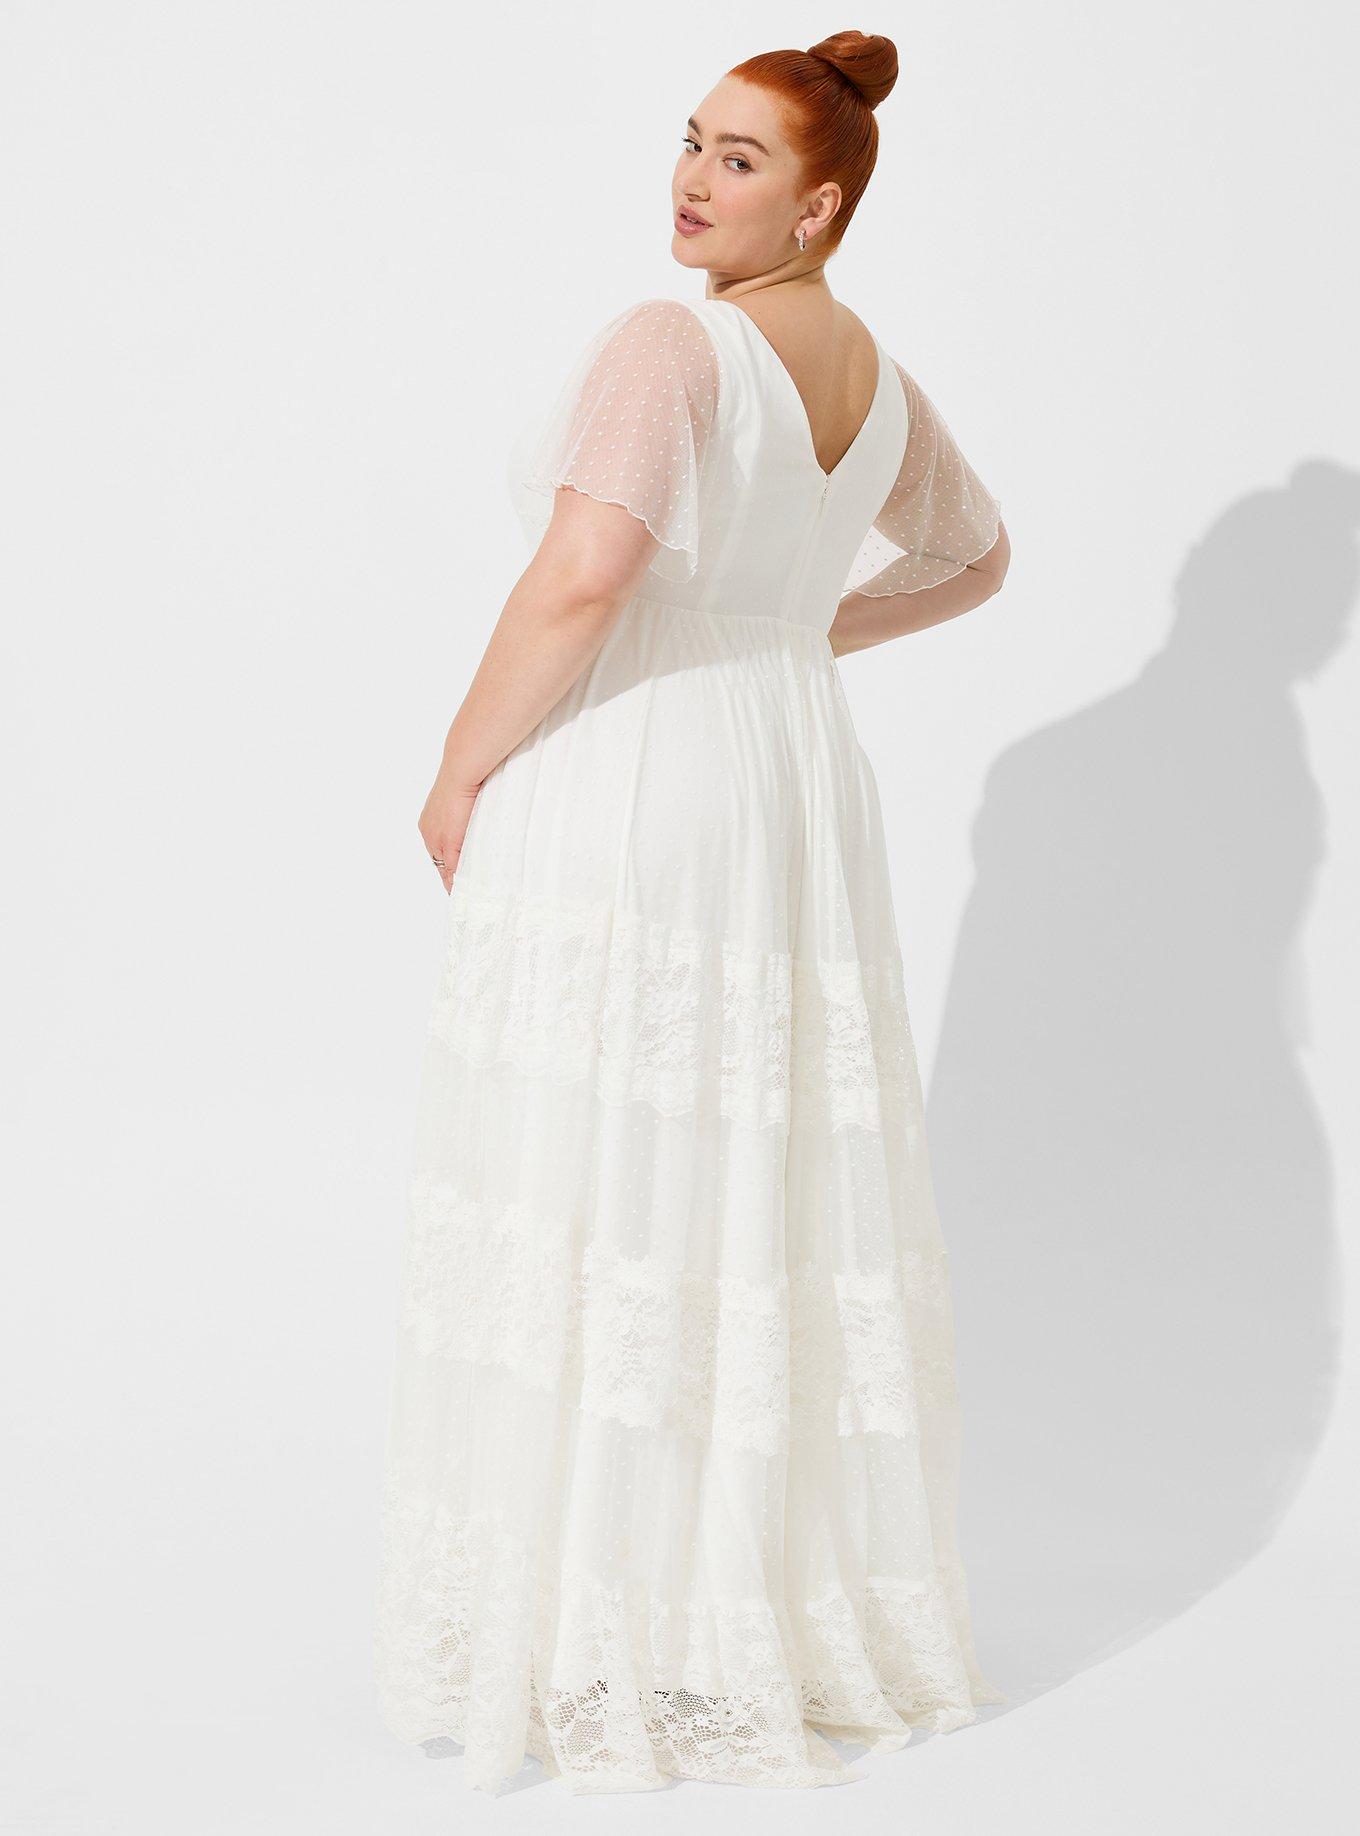 Affordable Plus-Size Wedding Dresses from Torrid - PureWow